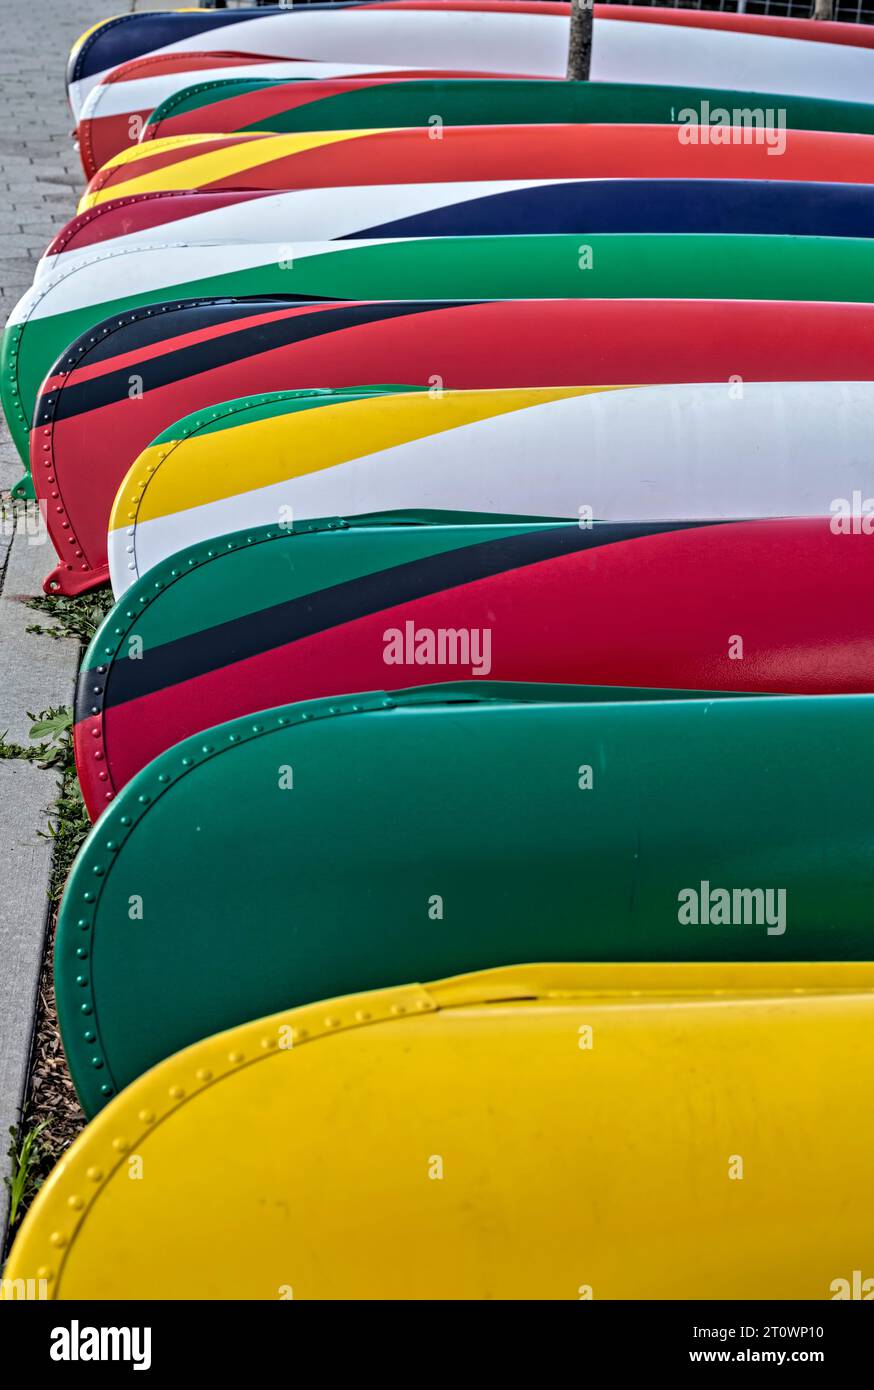 Rental canoes lie in wait at the Gantry Plaza State Park Recreational Dock, at Long Island City’s East River shore. Stock Photo